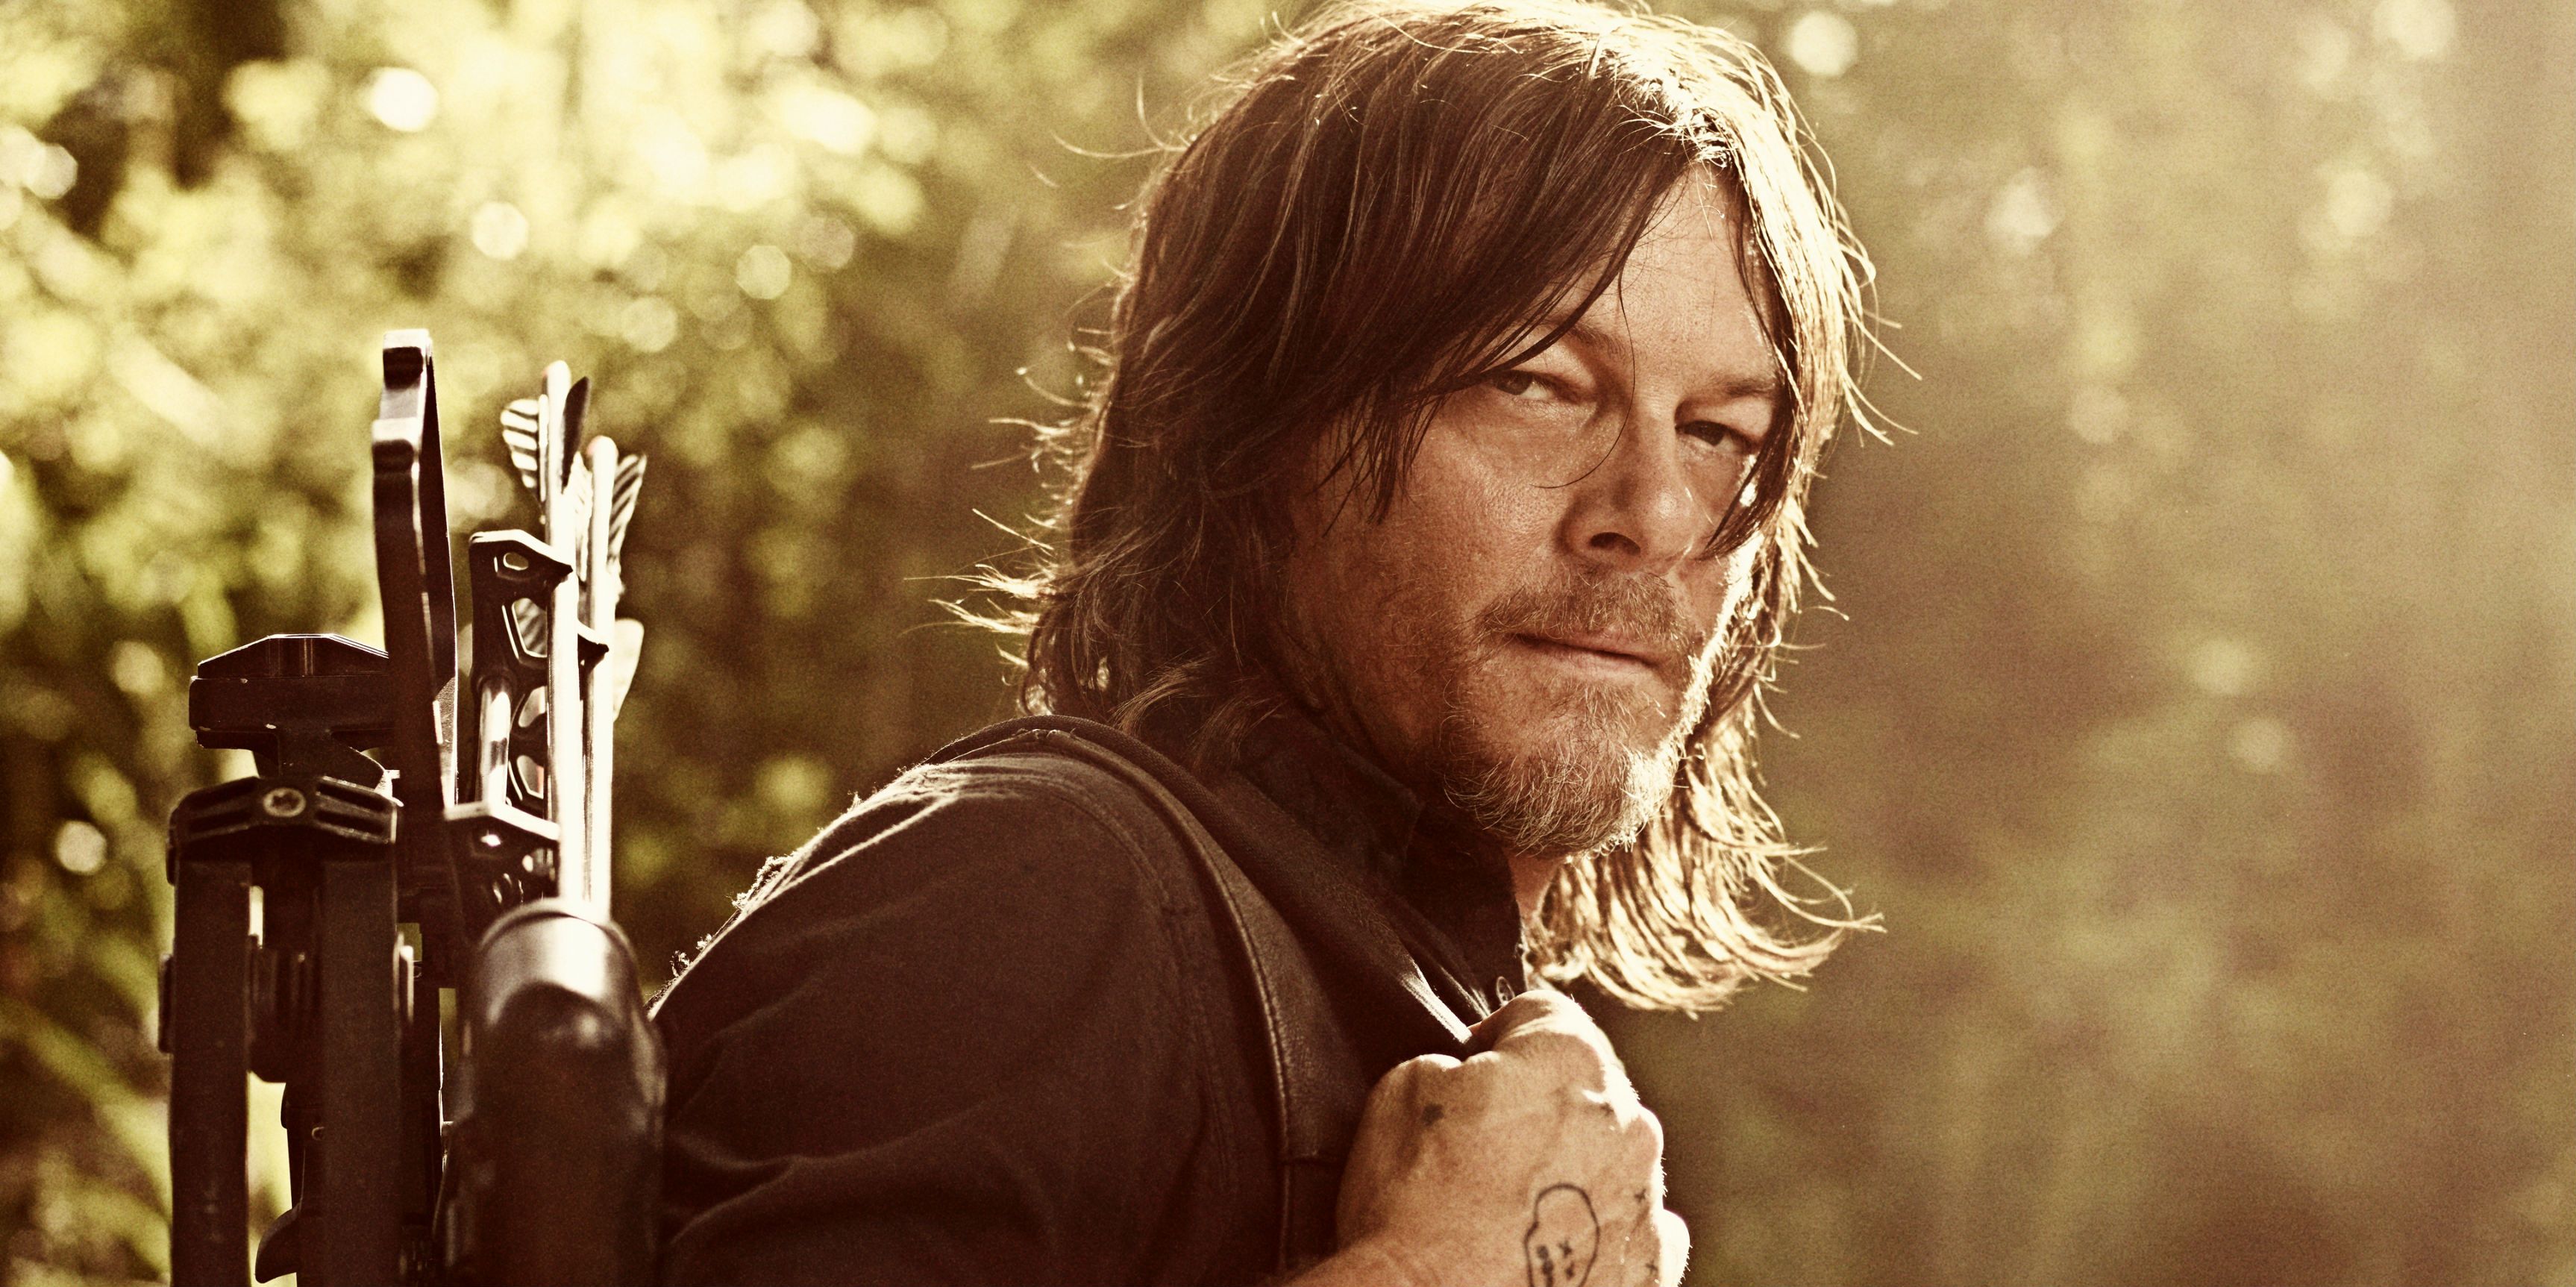 The Ultimate Death Wish: Unveiling The Walking Dead Characters With the ...